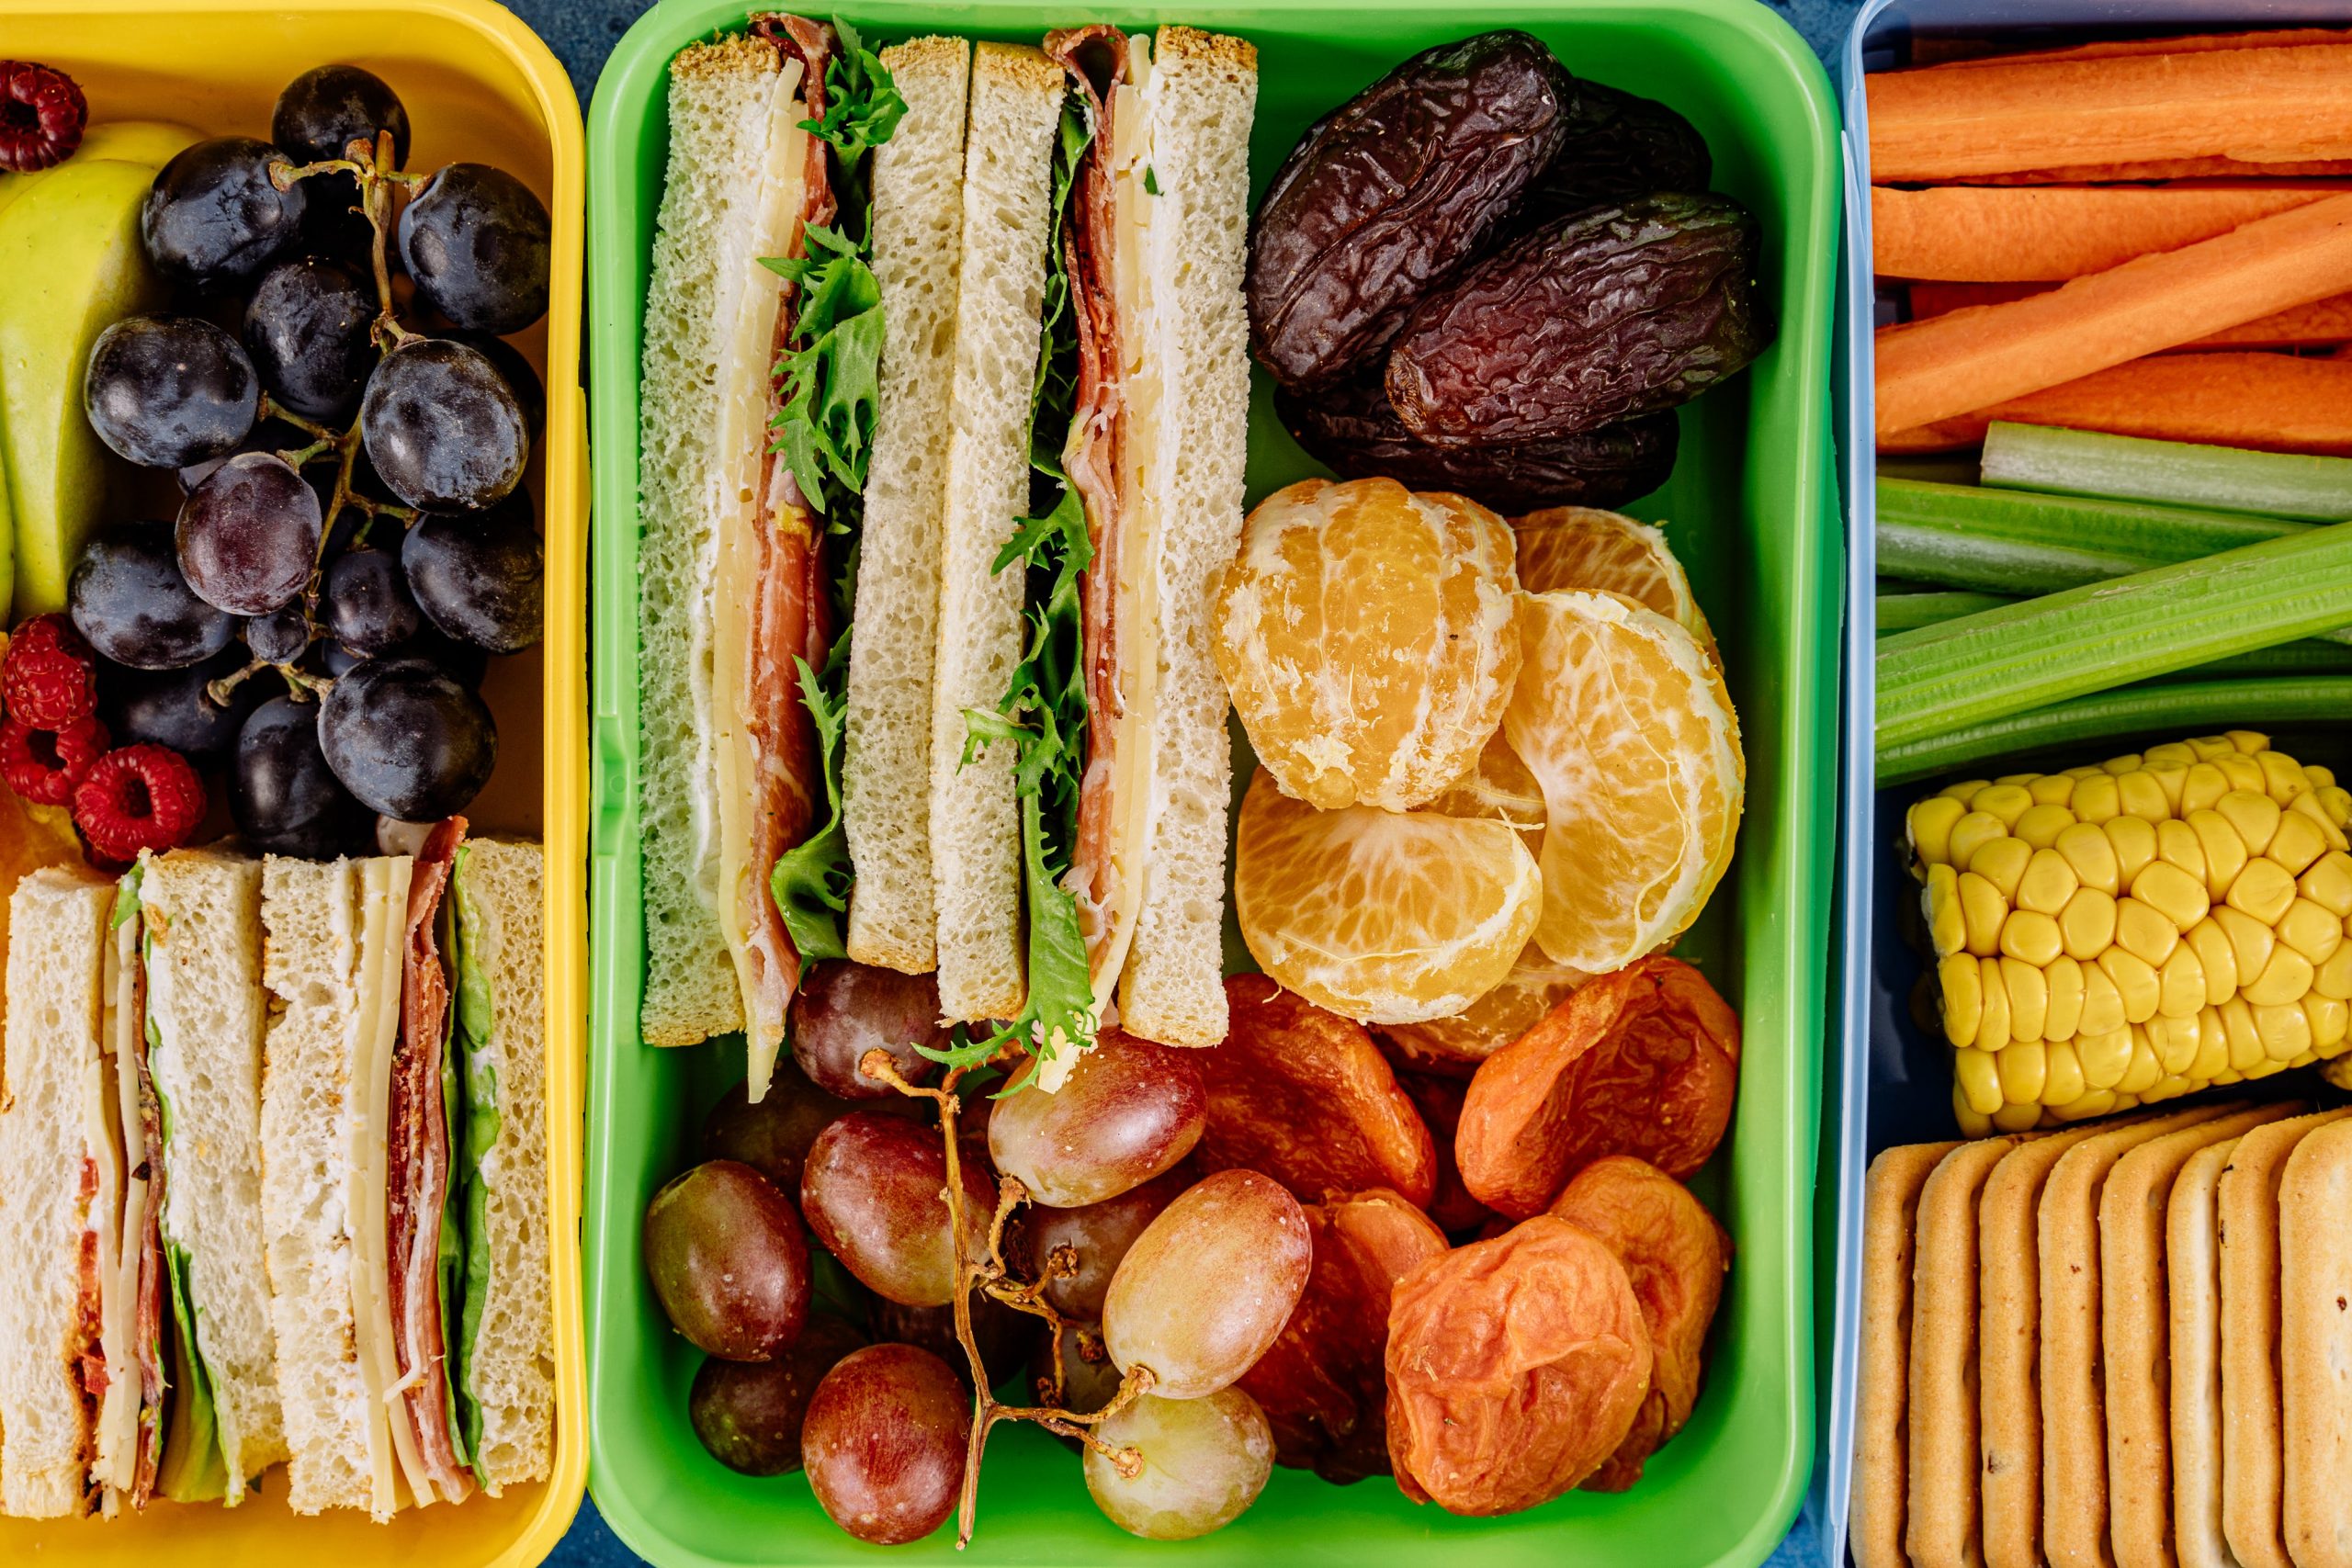 A fresh and healthy lunchbox for pre-school